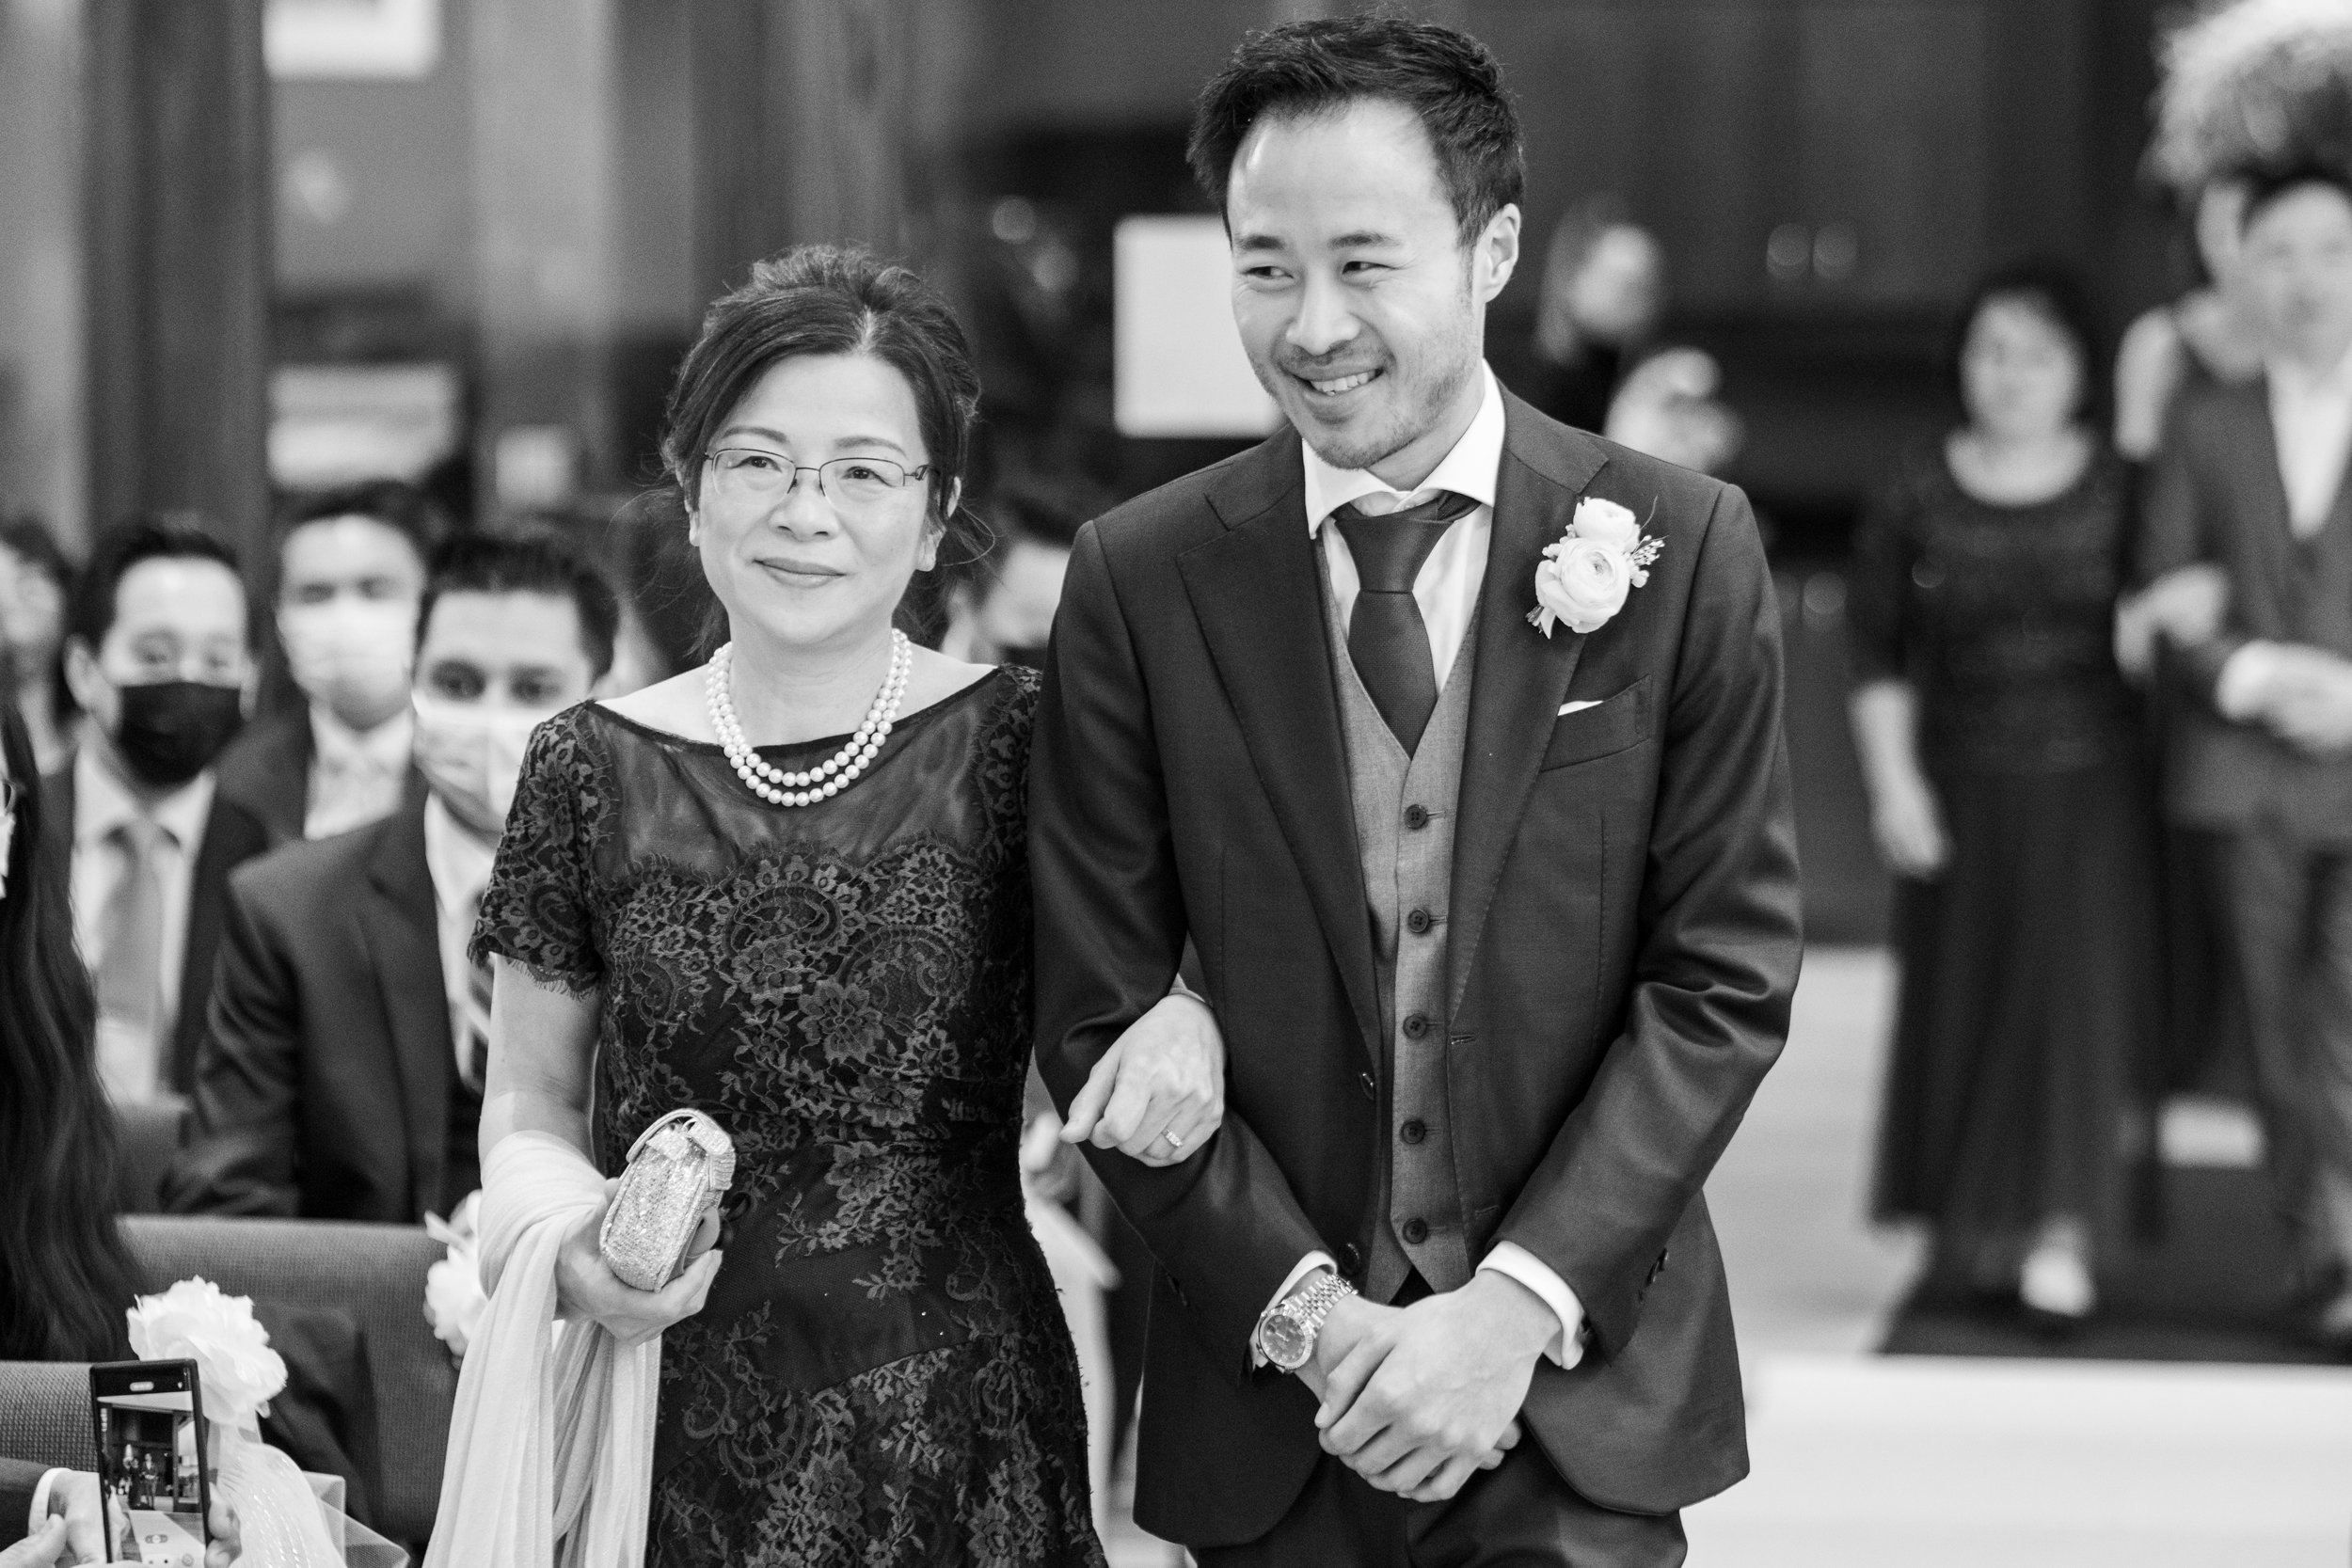  A candid wedding photograph of Jarvis walking his mom down the wedding aisle at Lawrence Park Community Church  before their wedding reception later at Graydon Hall in Toronto, Ontario.  Photograph by Toronto Wedding Photographer Scott Williams.  